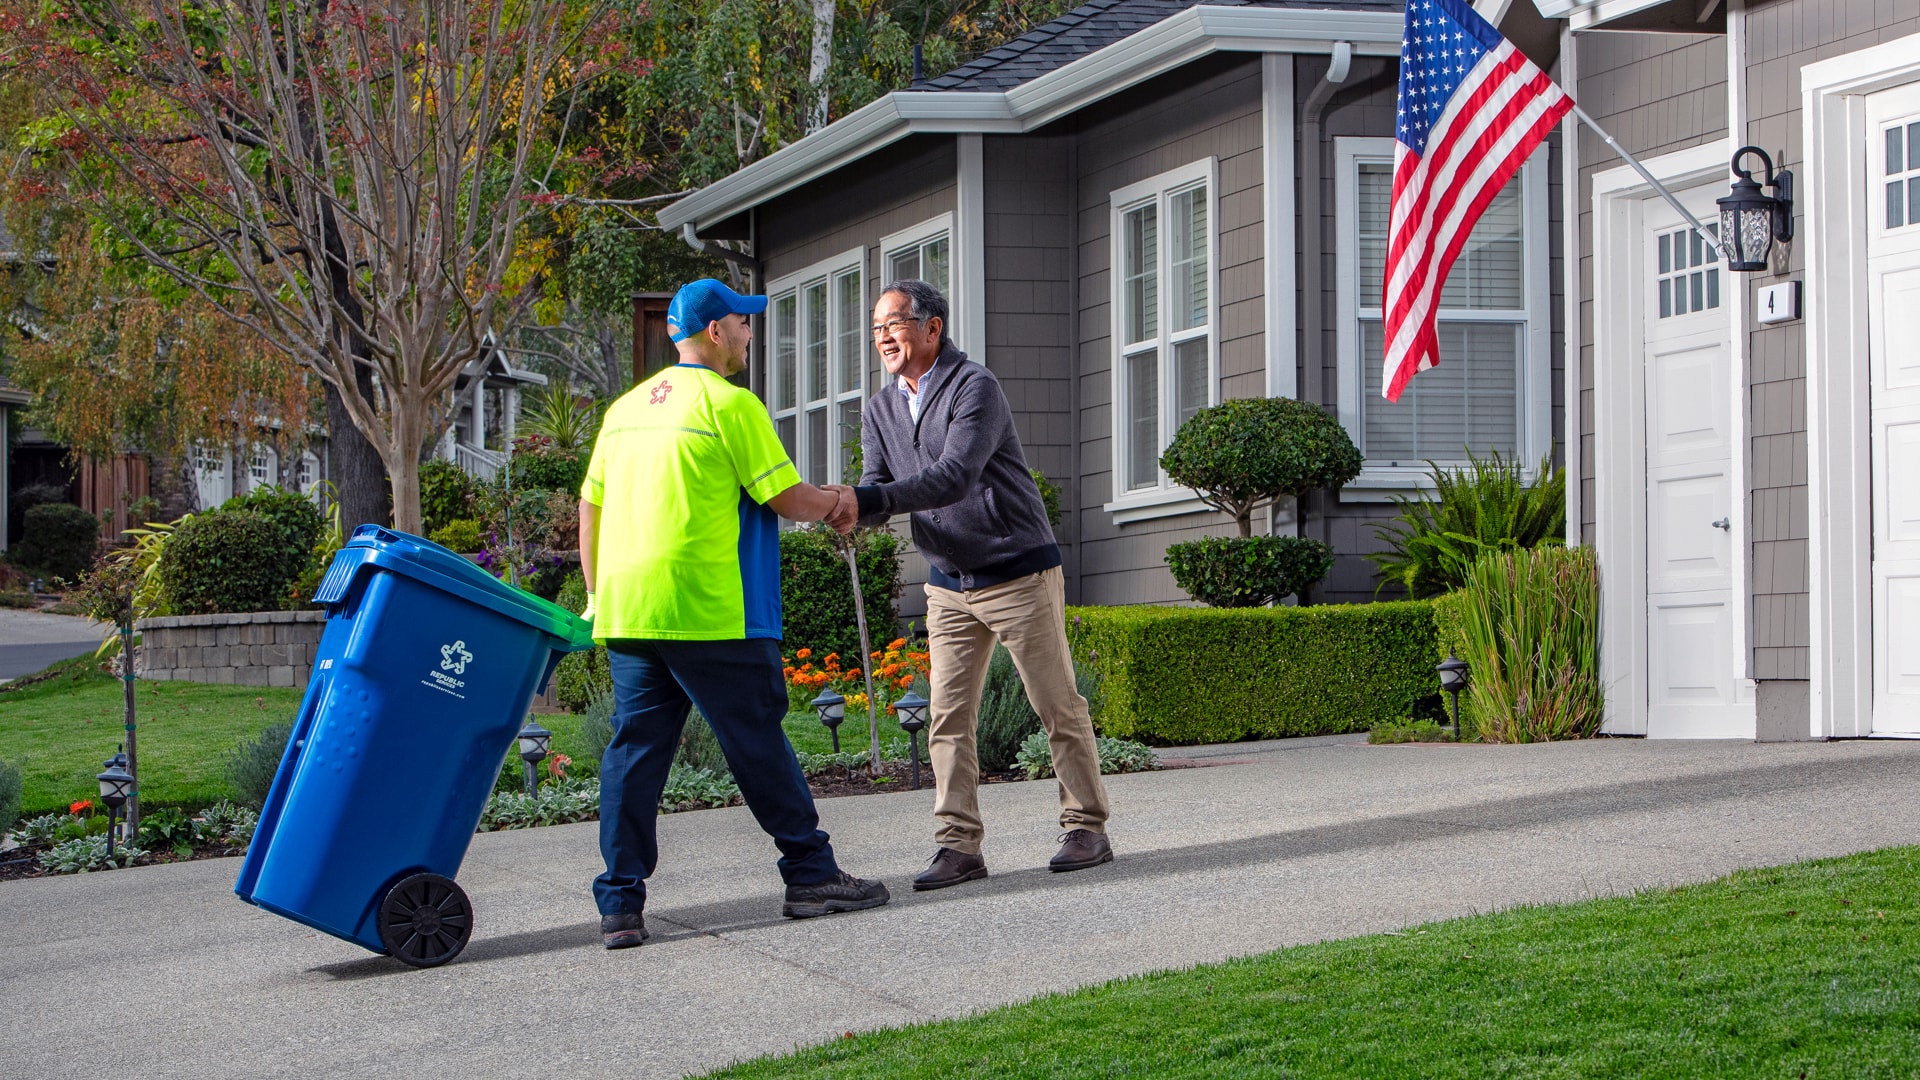 A Republic Services employee in a bright yellow shirt rolls a blue recycling pail with the Republic Services logo up a home owner's driveway.